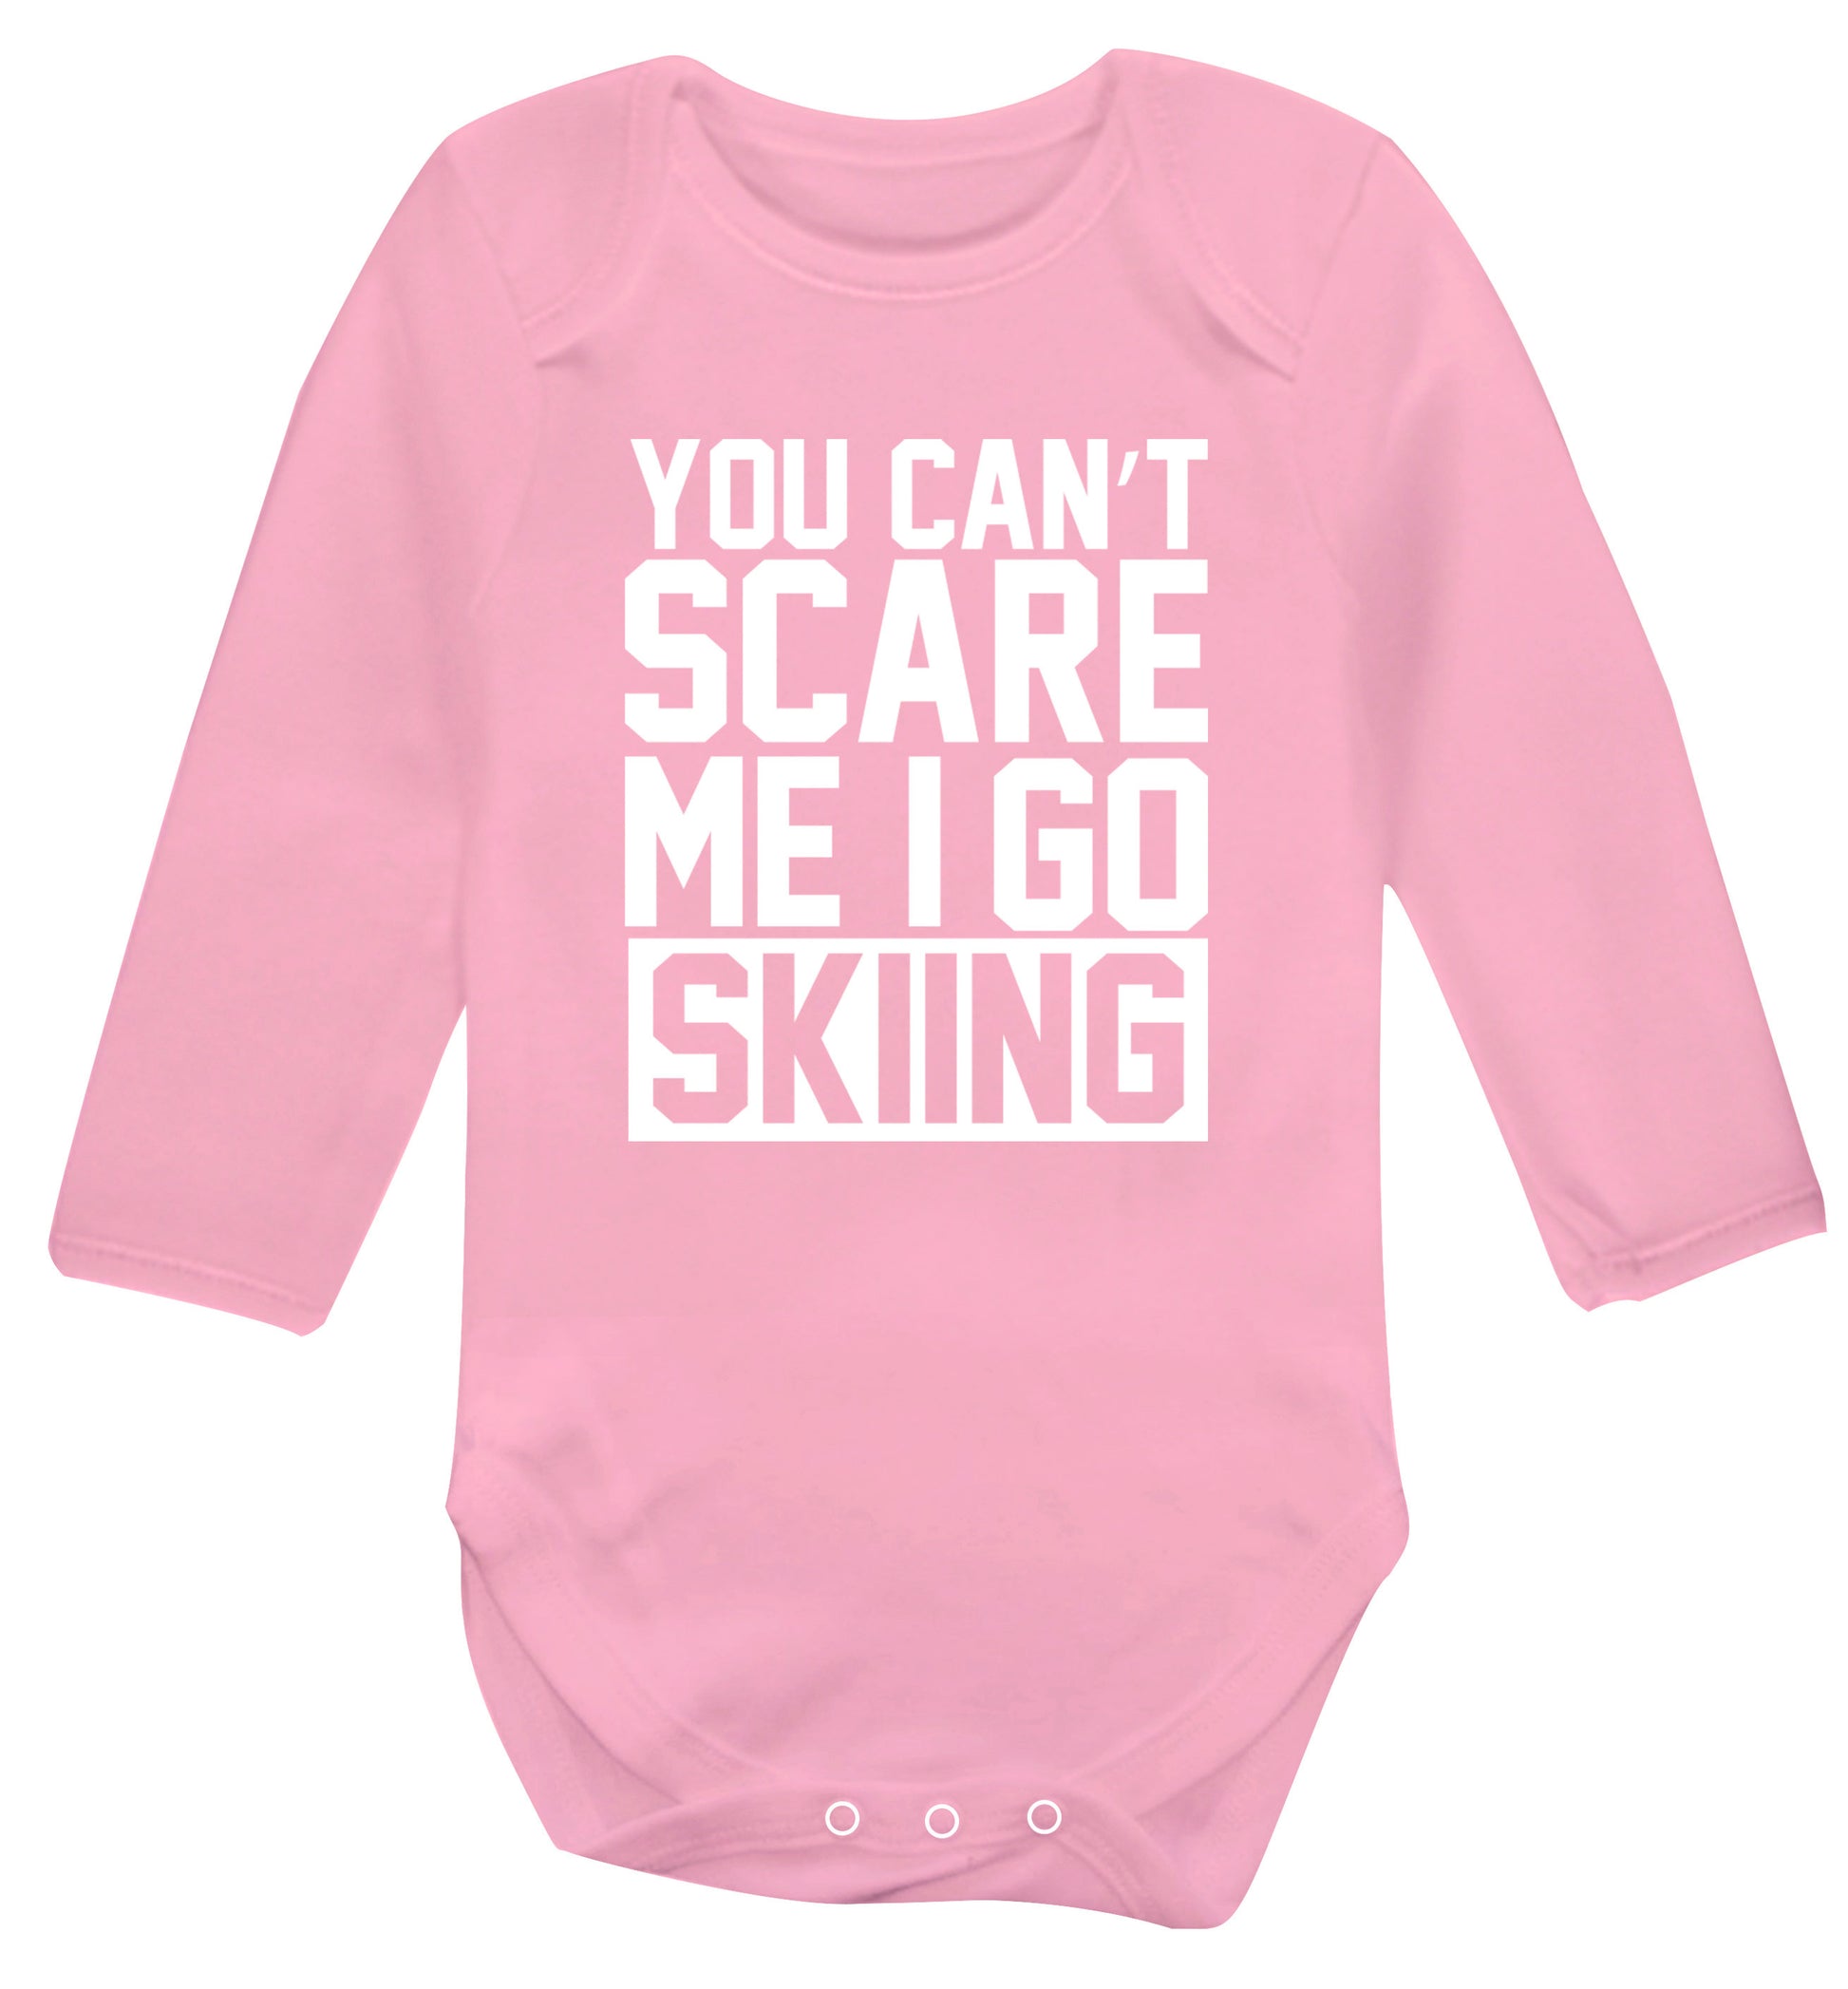 You can't scare me I go skiing Baby Vest long sleeved pale pink 6-12 months